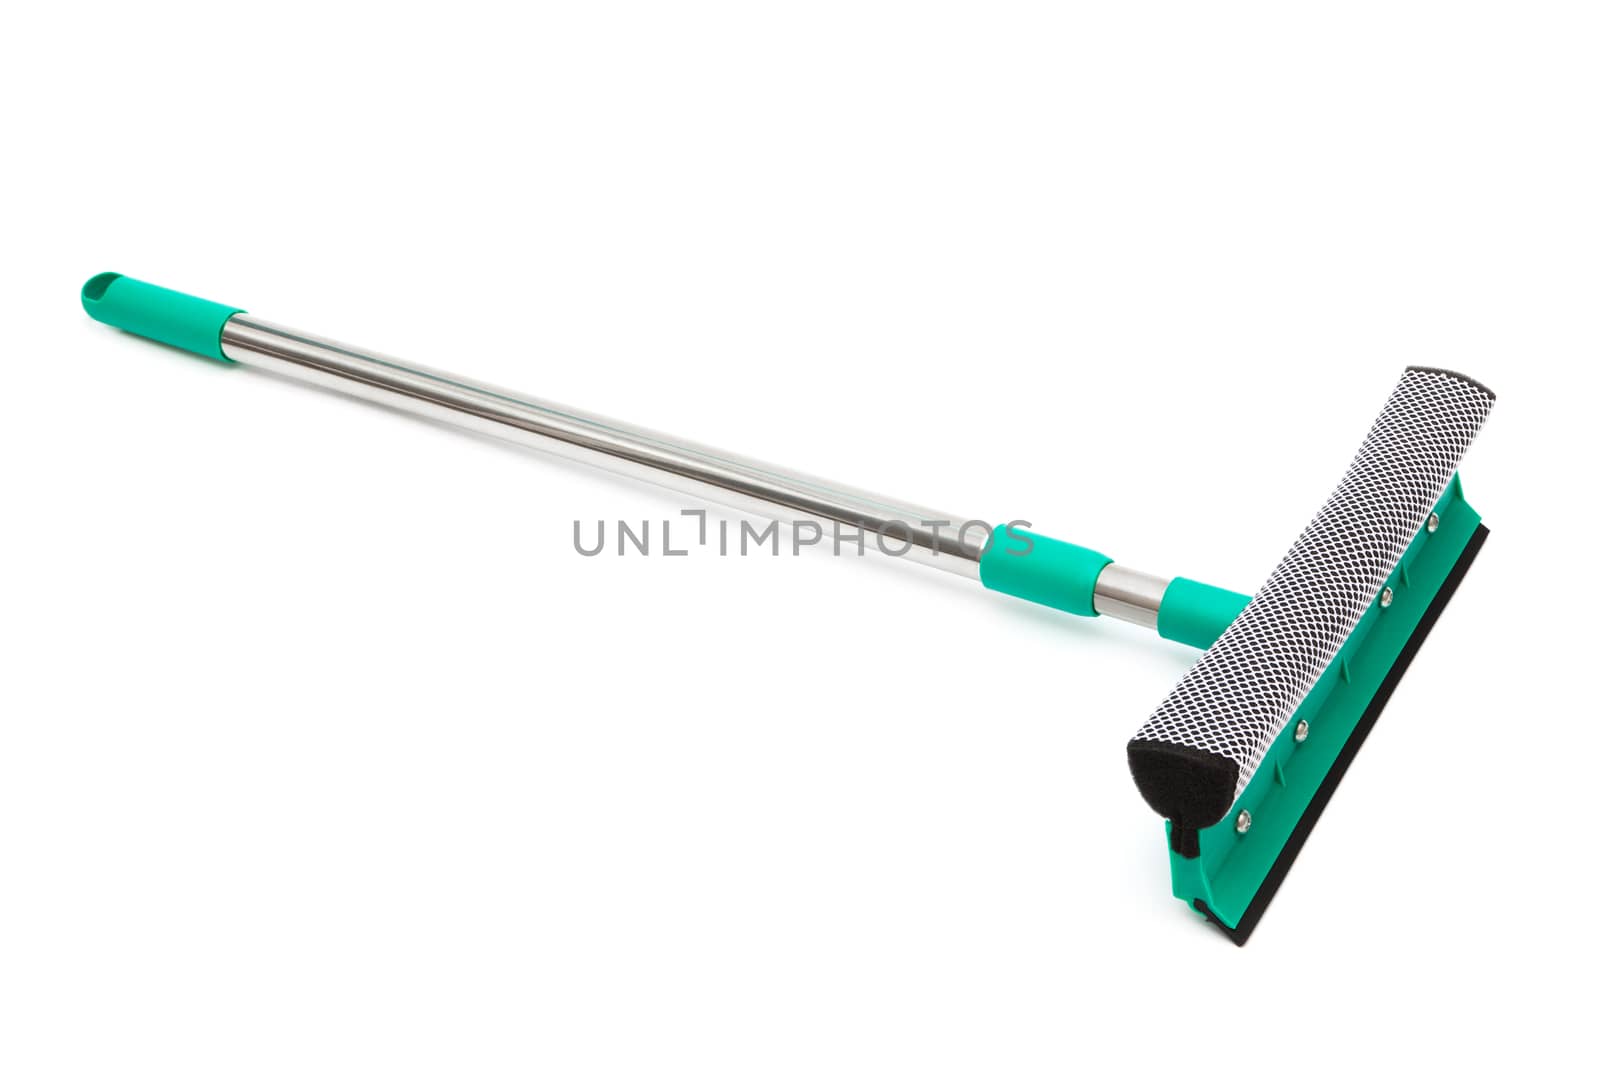 mop for cleaning windows on a white background